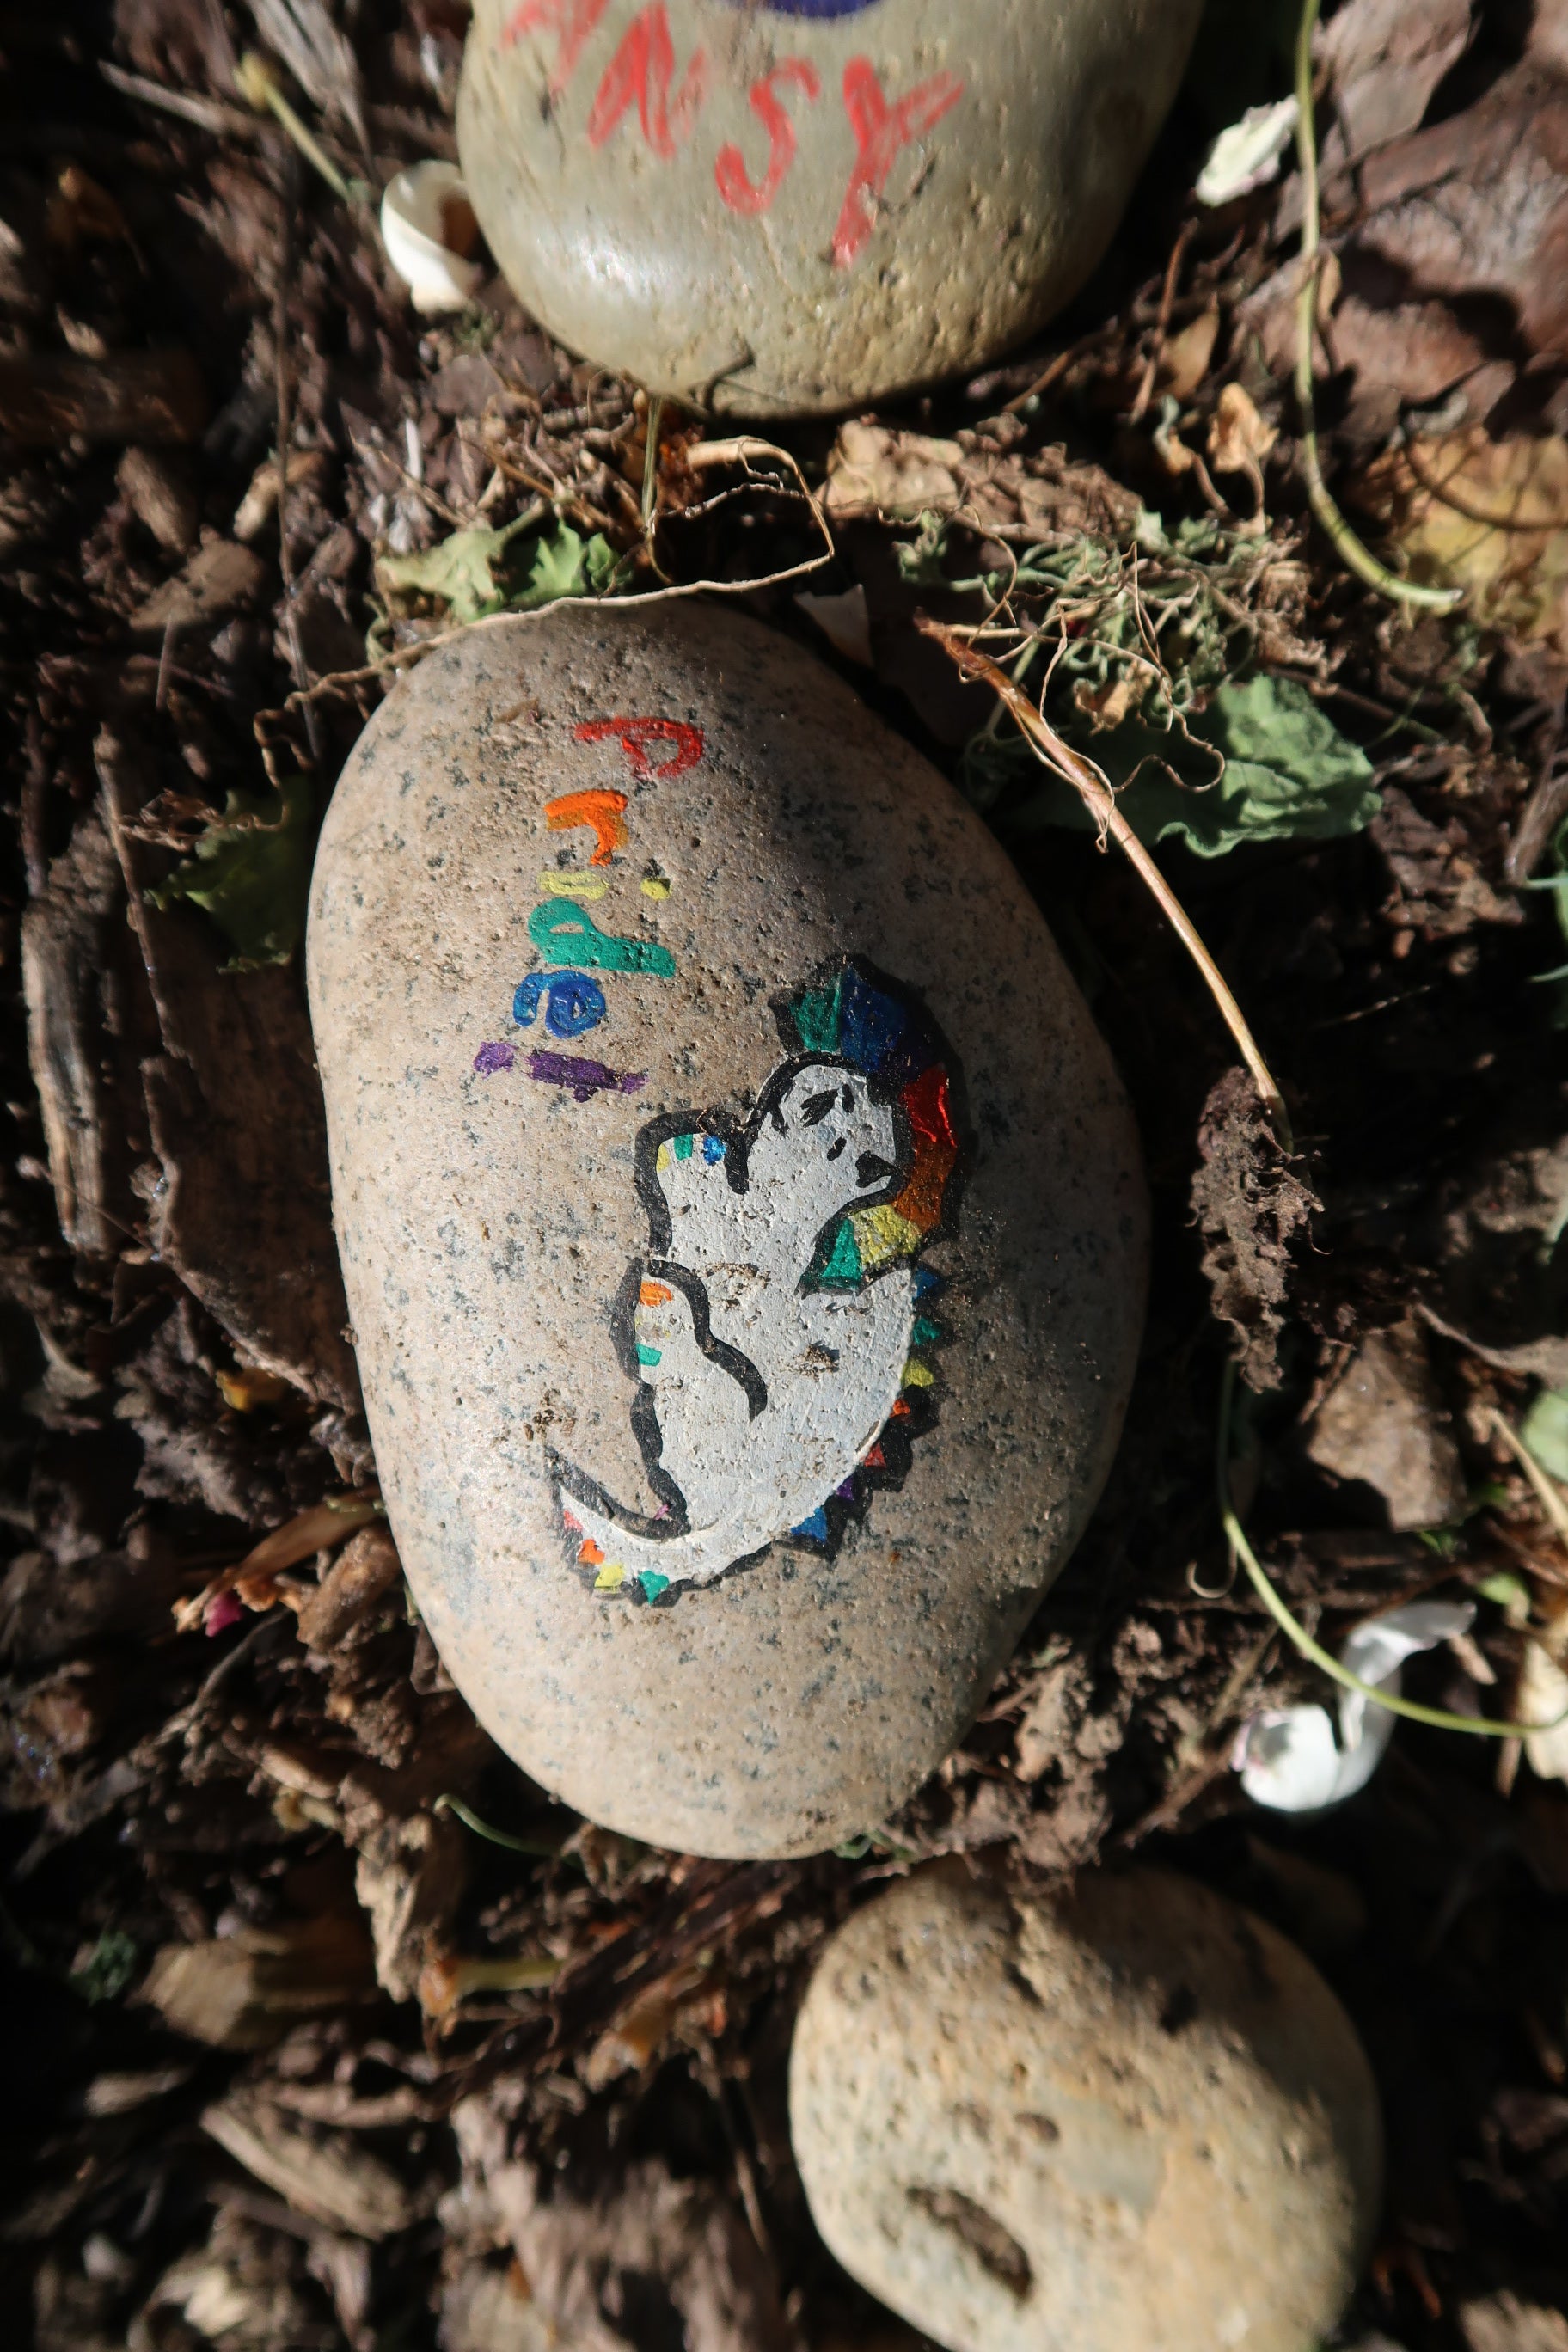 Rock painted with a unicorn and the word "Pride"